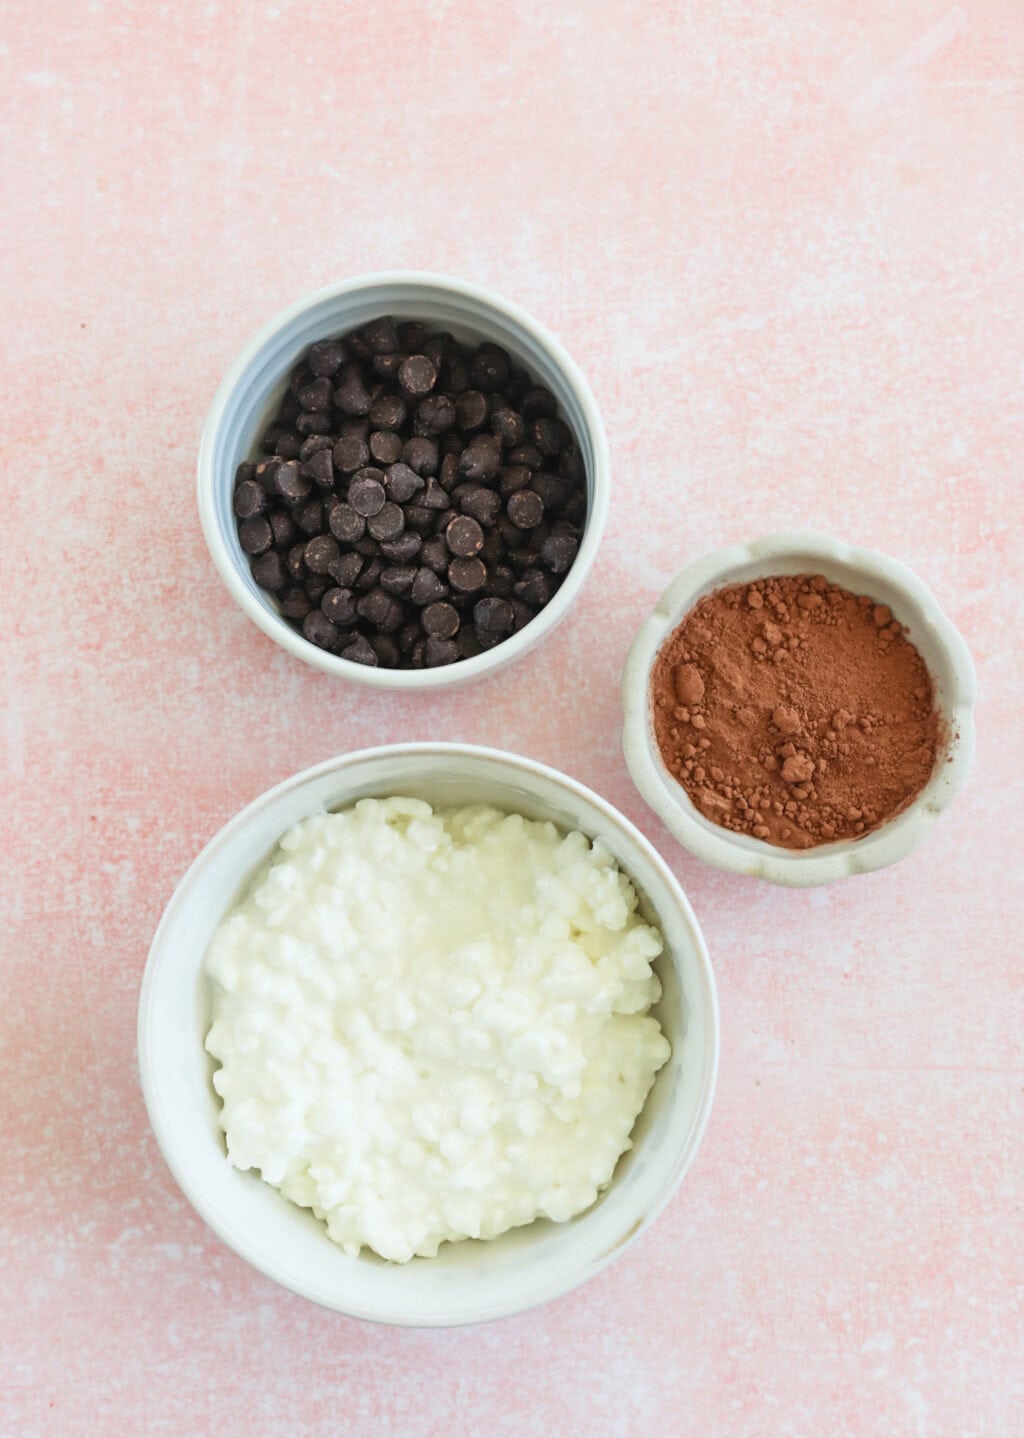 Ingredients for 5-Minute Cottage Cheese Chocolate Mousse in small white bowls, including cottage cheese, chocolate chips, and cacao